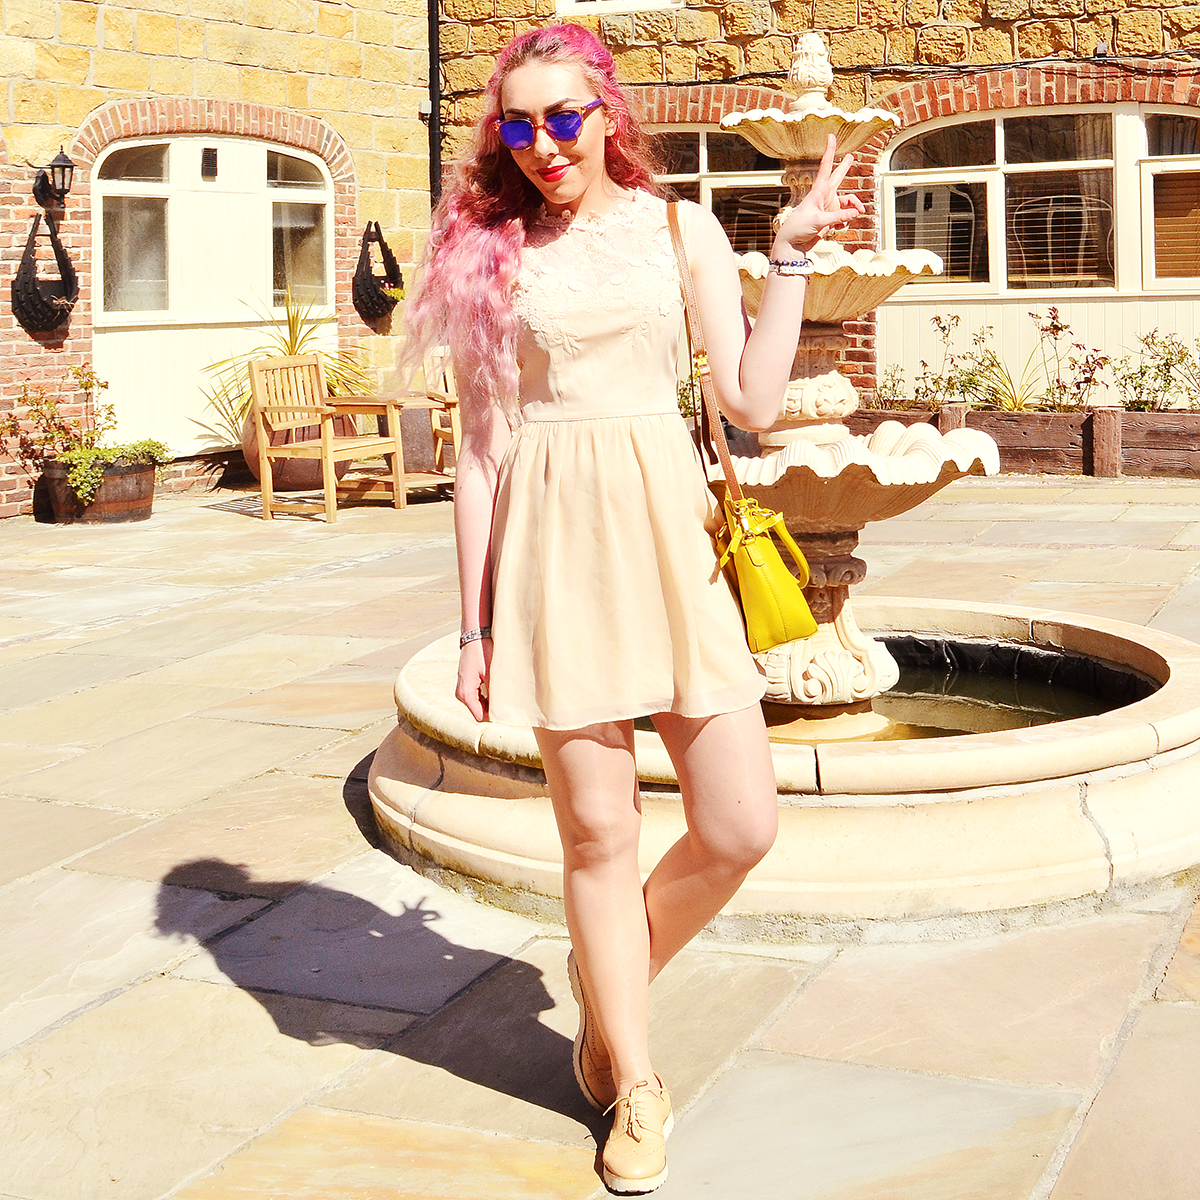 Stephi LaReine // Peach Floral Collar Summer Dress // Oasis (old) Sulphur Yellow Leather Bag * // Boden Clothing DKNY Watch * // House Of Watches Beige Lace Up Platform Brogues * // StyleEdit Carrera Purple Mirrored Sunglasses * // Sunglasses Shop